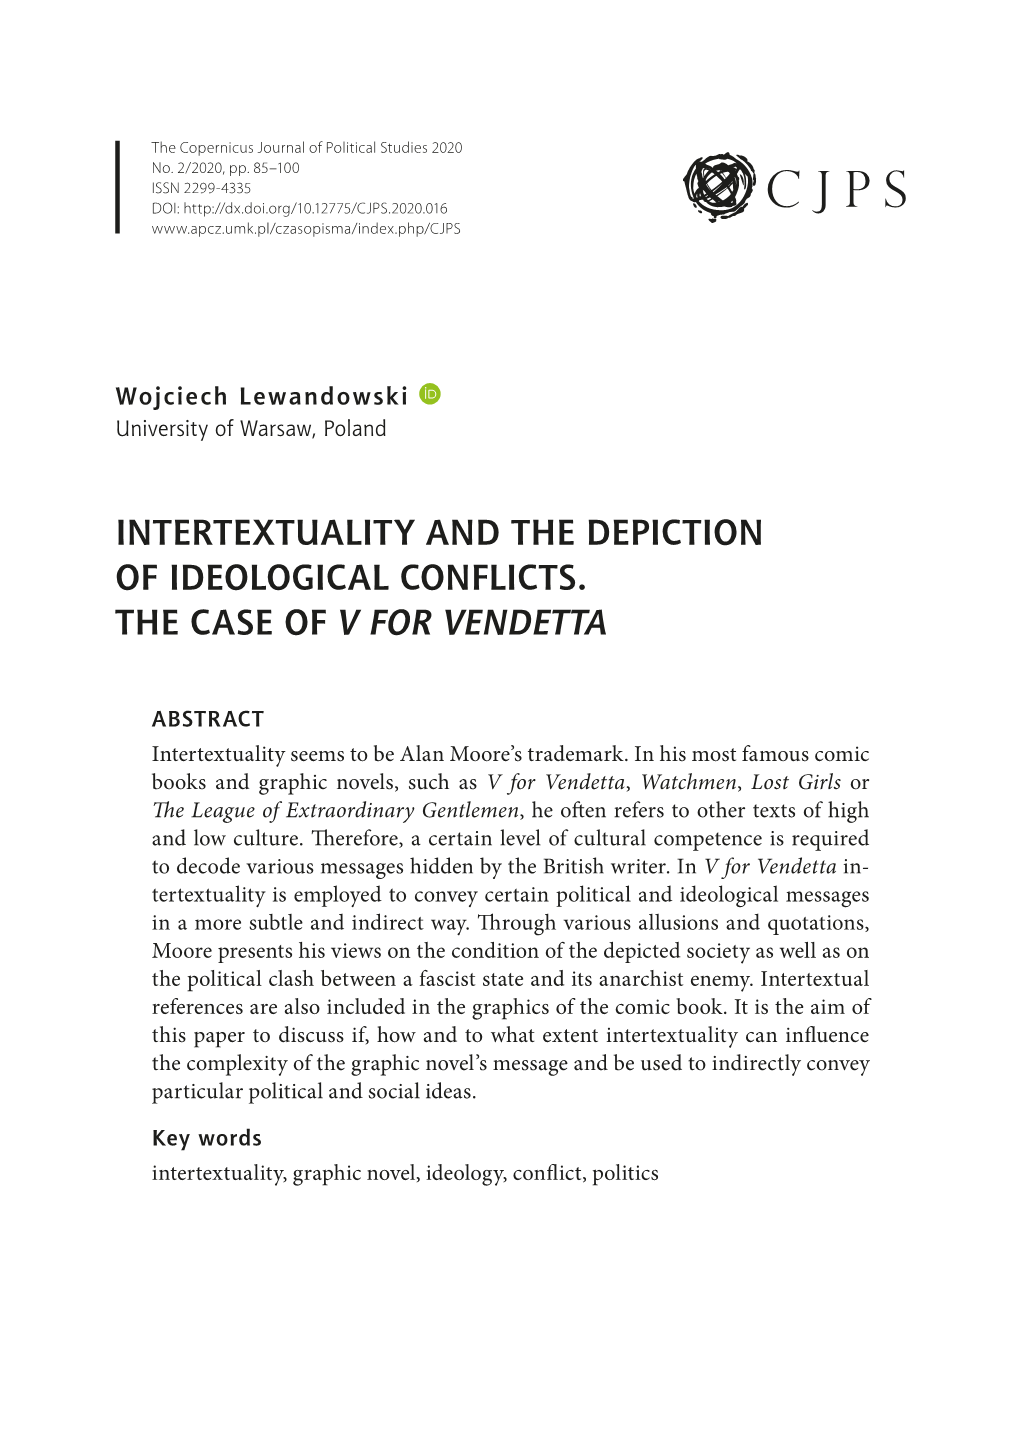 Intertextuality and the Depiction of Ideological Conflicts